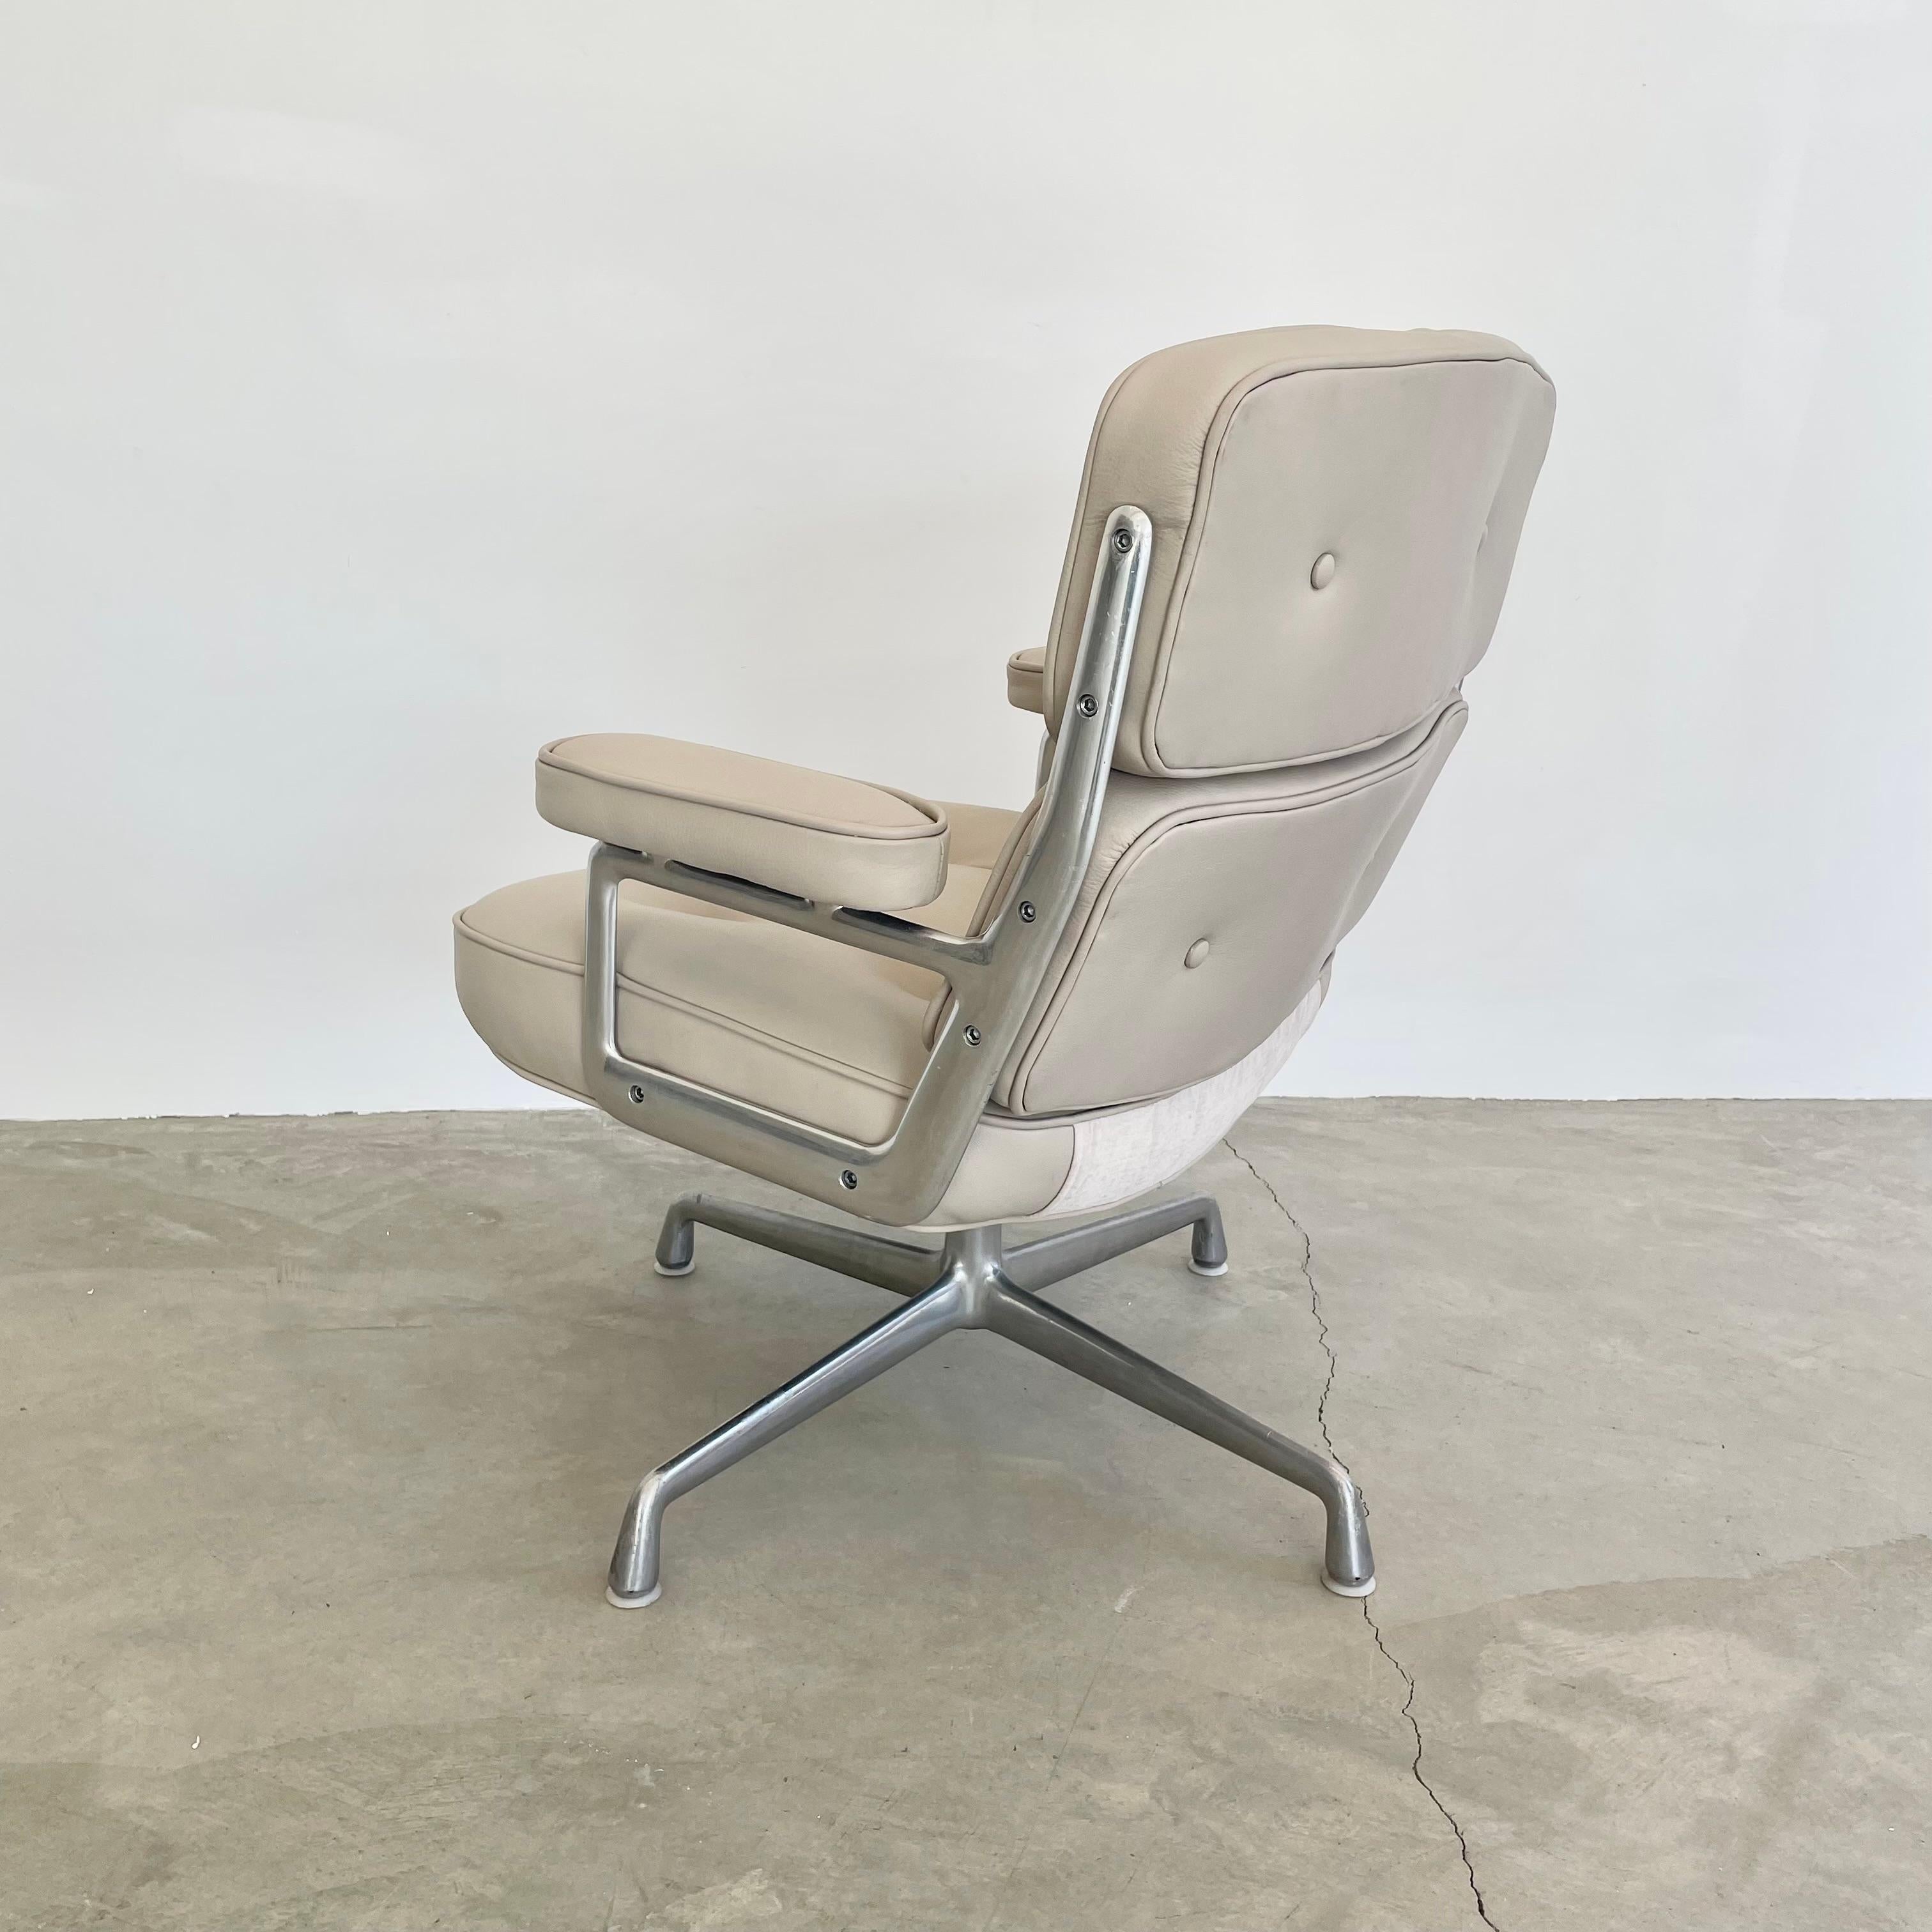 Late 20th Century Eames Time Life Chair in Grey Leather for Herman Miller, 1980s For Sale